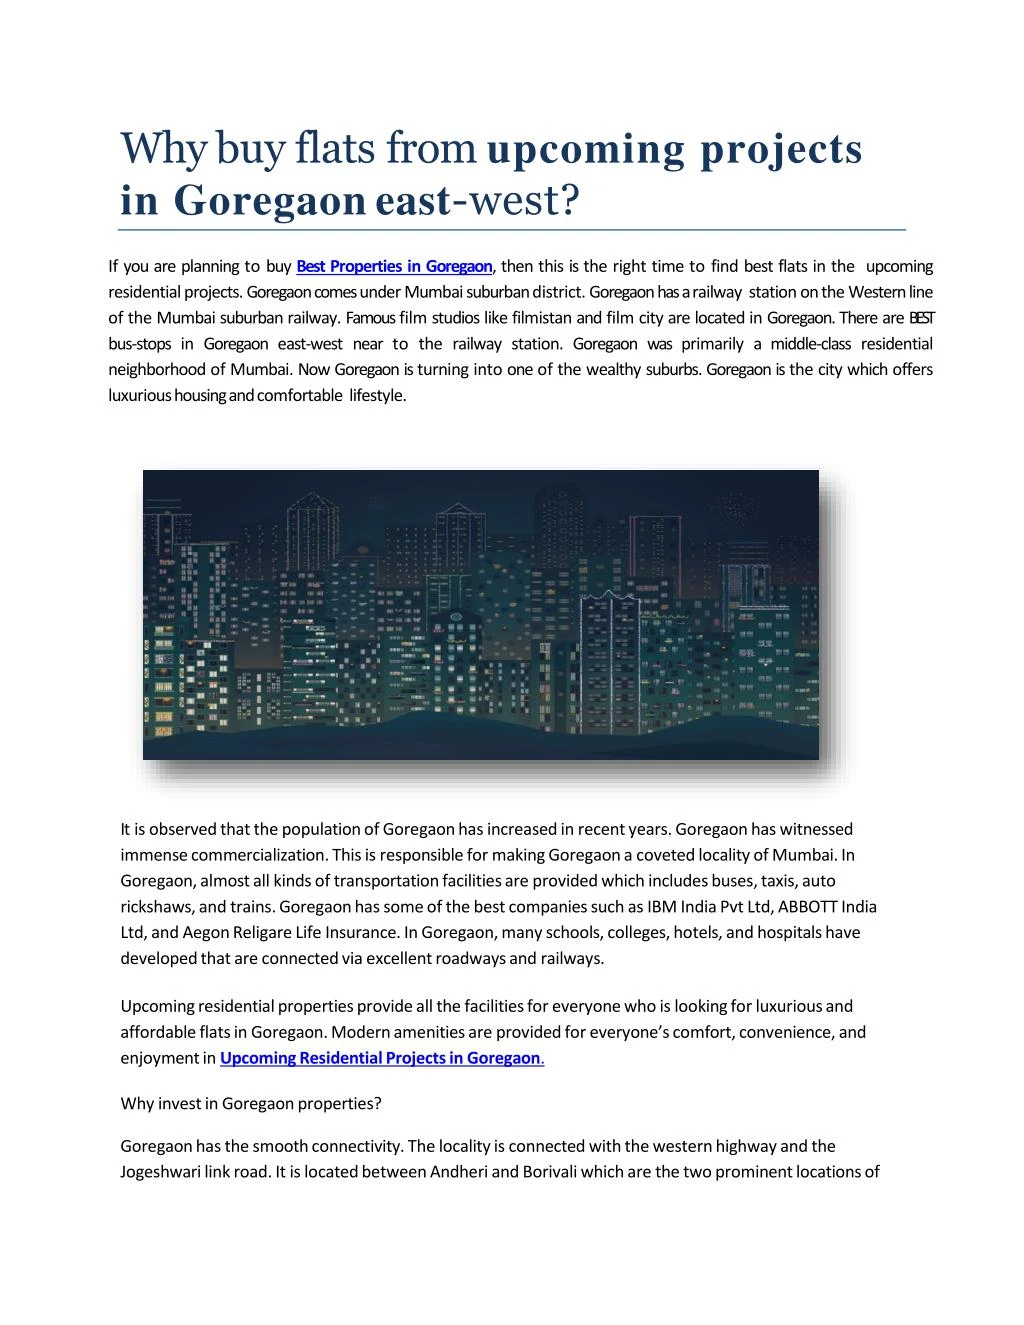 why buy flats from upcoming projects in goregaon east west